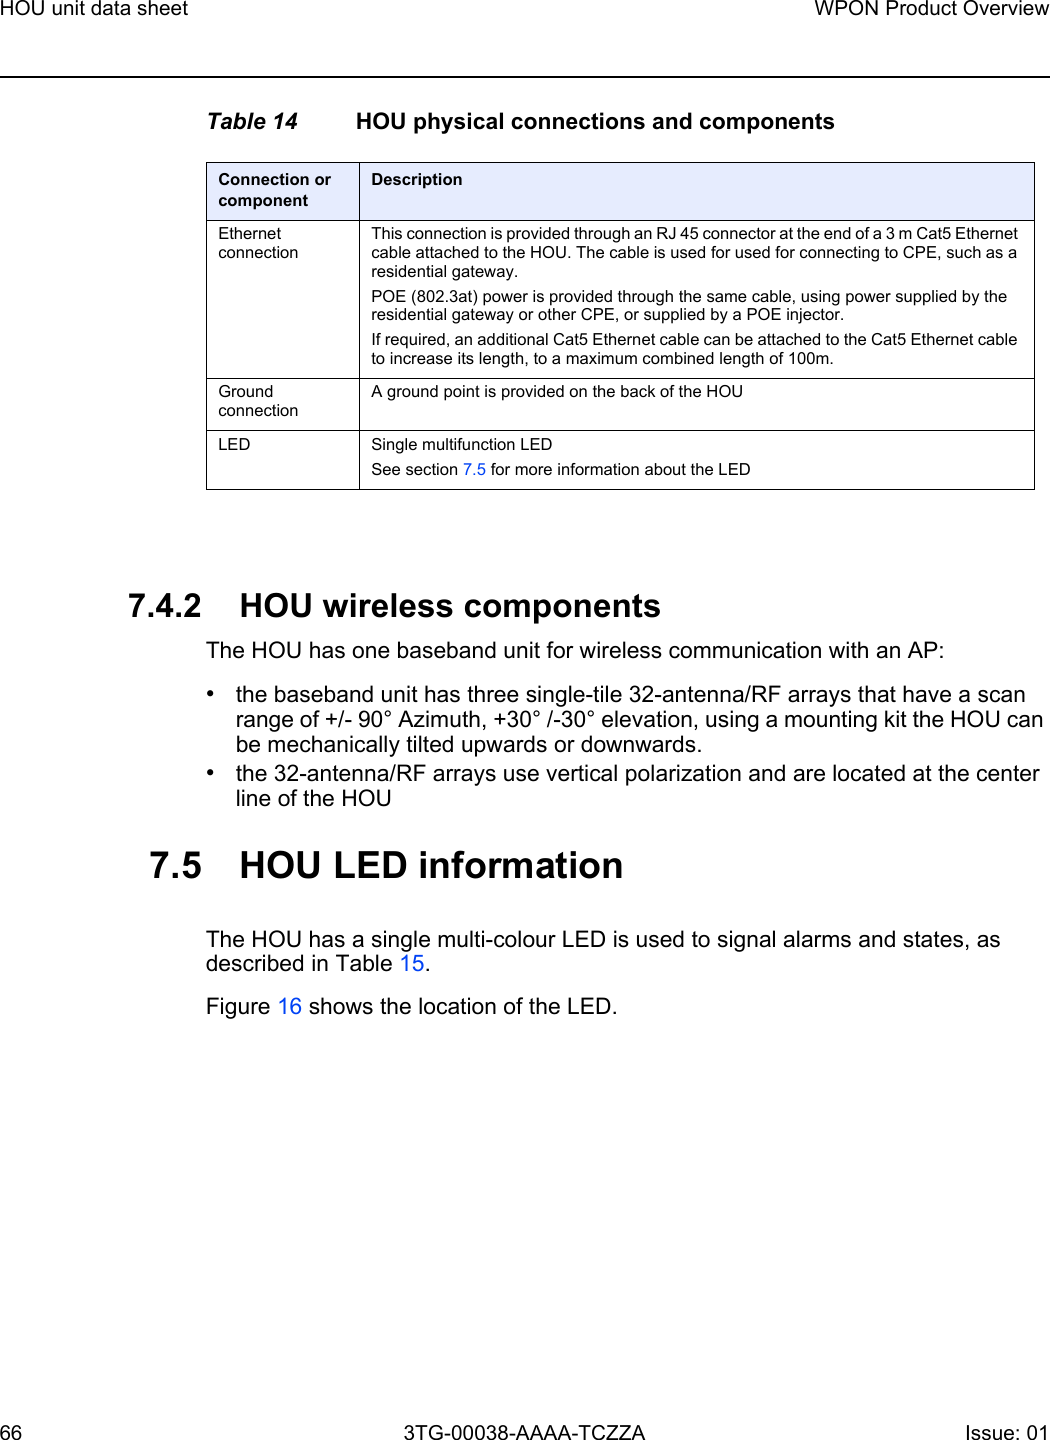 HOU unit data sheet66WPON Product Overview3TG-00038-AAAA-TCZZA Issue: 01 Table 14 HOU physical connections and components7.4.2 HOU wireless componentsThe HOU has one baseband unit for wireless communication with an AP: •the baseband unit has three single-tile 32-antenna/RF arrays that have a scan range of +/- 90° Azimuth, +30° /-30° elevation, using a mounting kit the HOU can be mechanically tilted upwards or downwards.•the 32-antenna/RF arrays use vertical polarization and are located at the center line of the HOU7.5 HOU LED informationThe HOU has a single multi-colour LED is used to signal alarms and states, as described in Table 15. Figure 16 shows the location of the LED.Connection or componentDescriptionEthernet connectionThis connection is provided through an RJ 45 connector at the end of a 3 m Cat5 Ethernet cable attached to the HOU. The cable is used for used for connecting to CPE, such as a residential gateway. POE (802.3at) power is provided through the same cable, using power supplied by the residential gateway or other CPE, or supplied by a POE injector.If required, an additional Cat5 Ethernet cable can be attached to the Cat5 Ethernet cable to increase its length, to a maximum combined length of 100m.Ground connectionA ground point is provided on the back of the HOULED Single multifunction LEDSee section 7.5 for more information about the LED